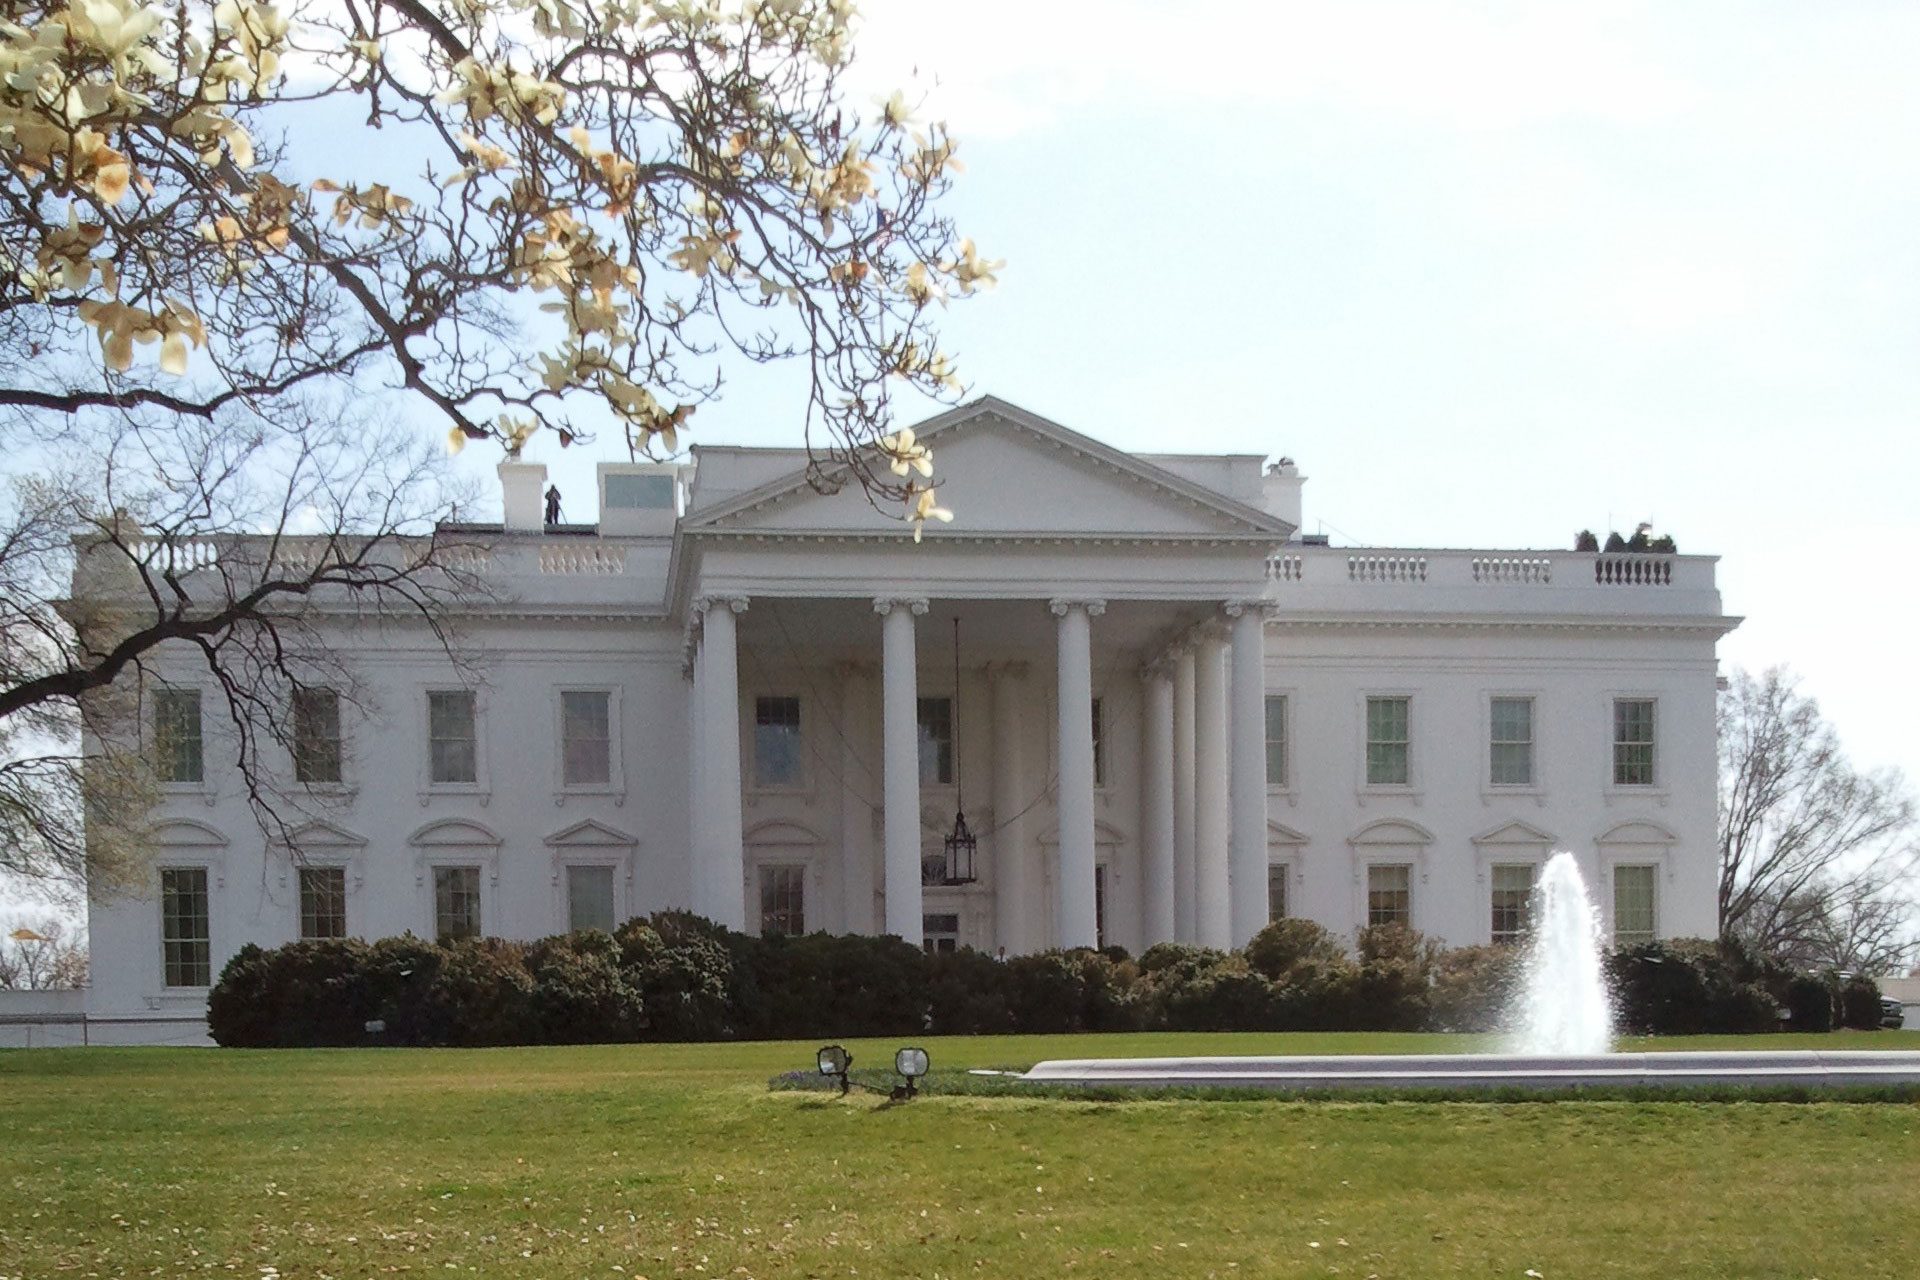 Throwback Attack: The White House gets hacked, threatening critical infrastructure